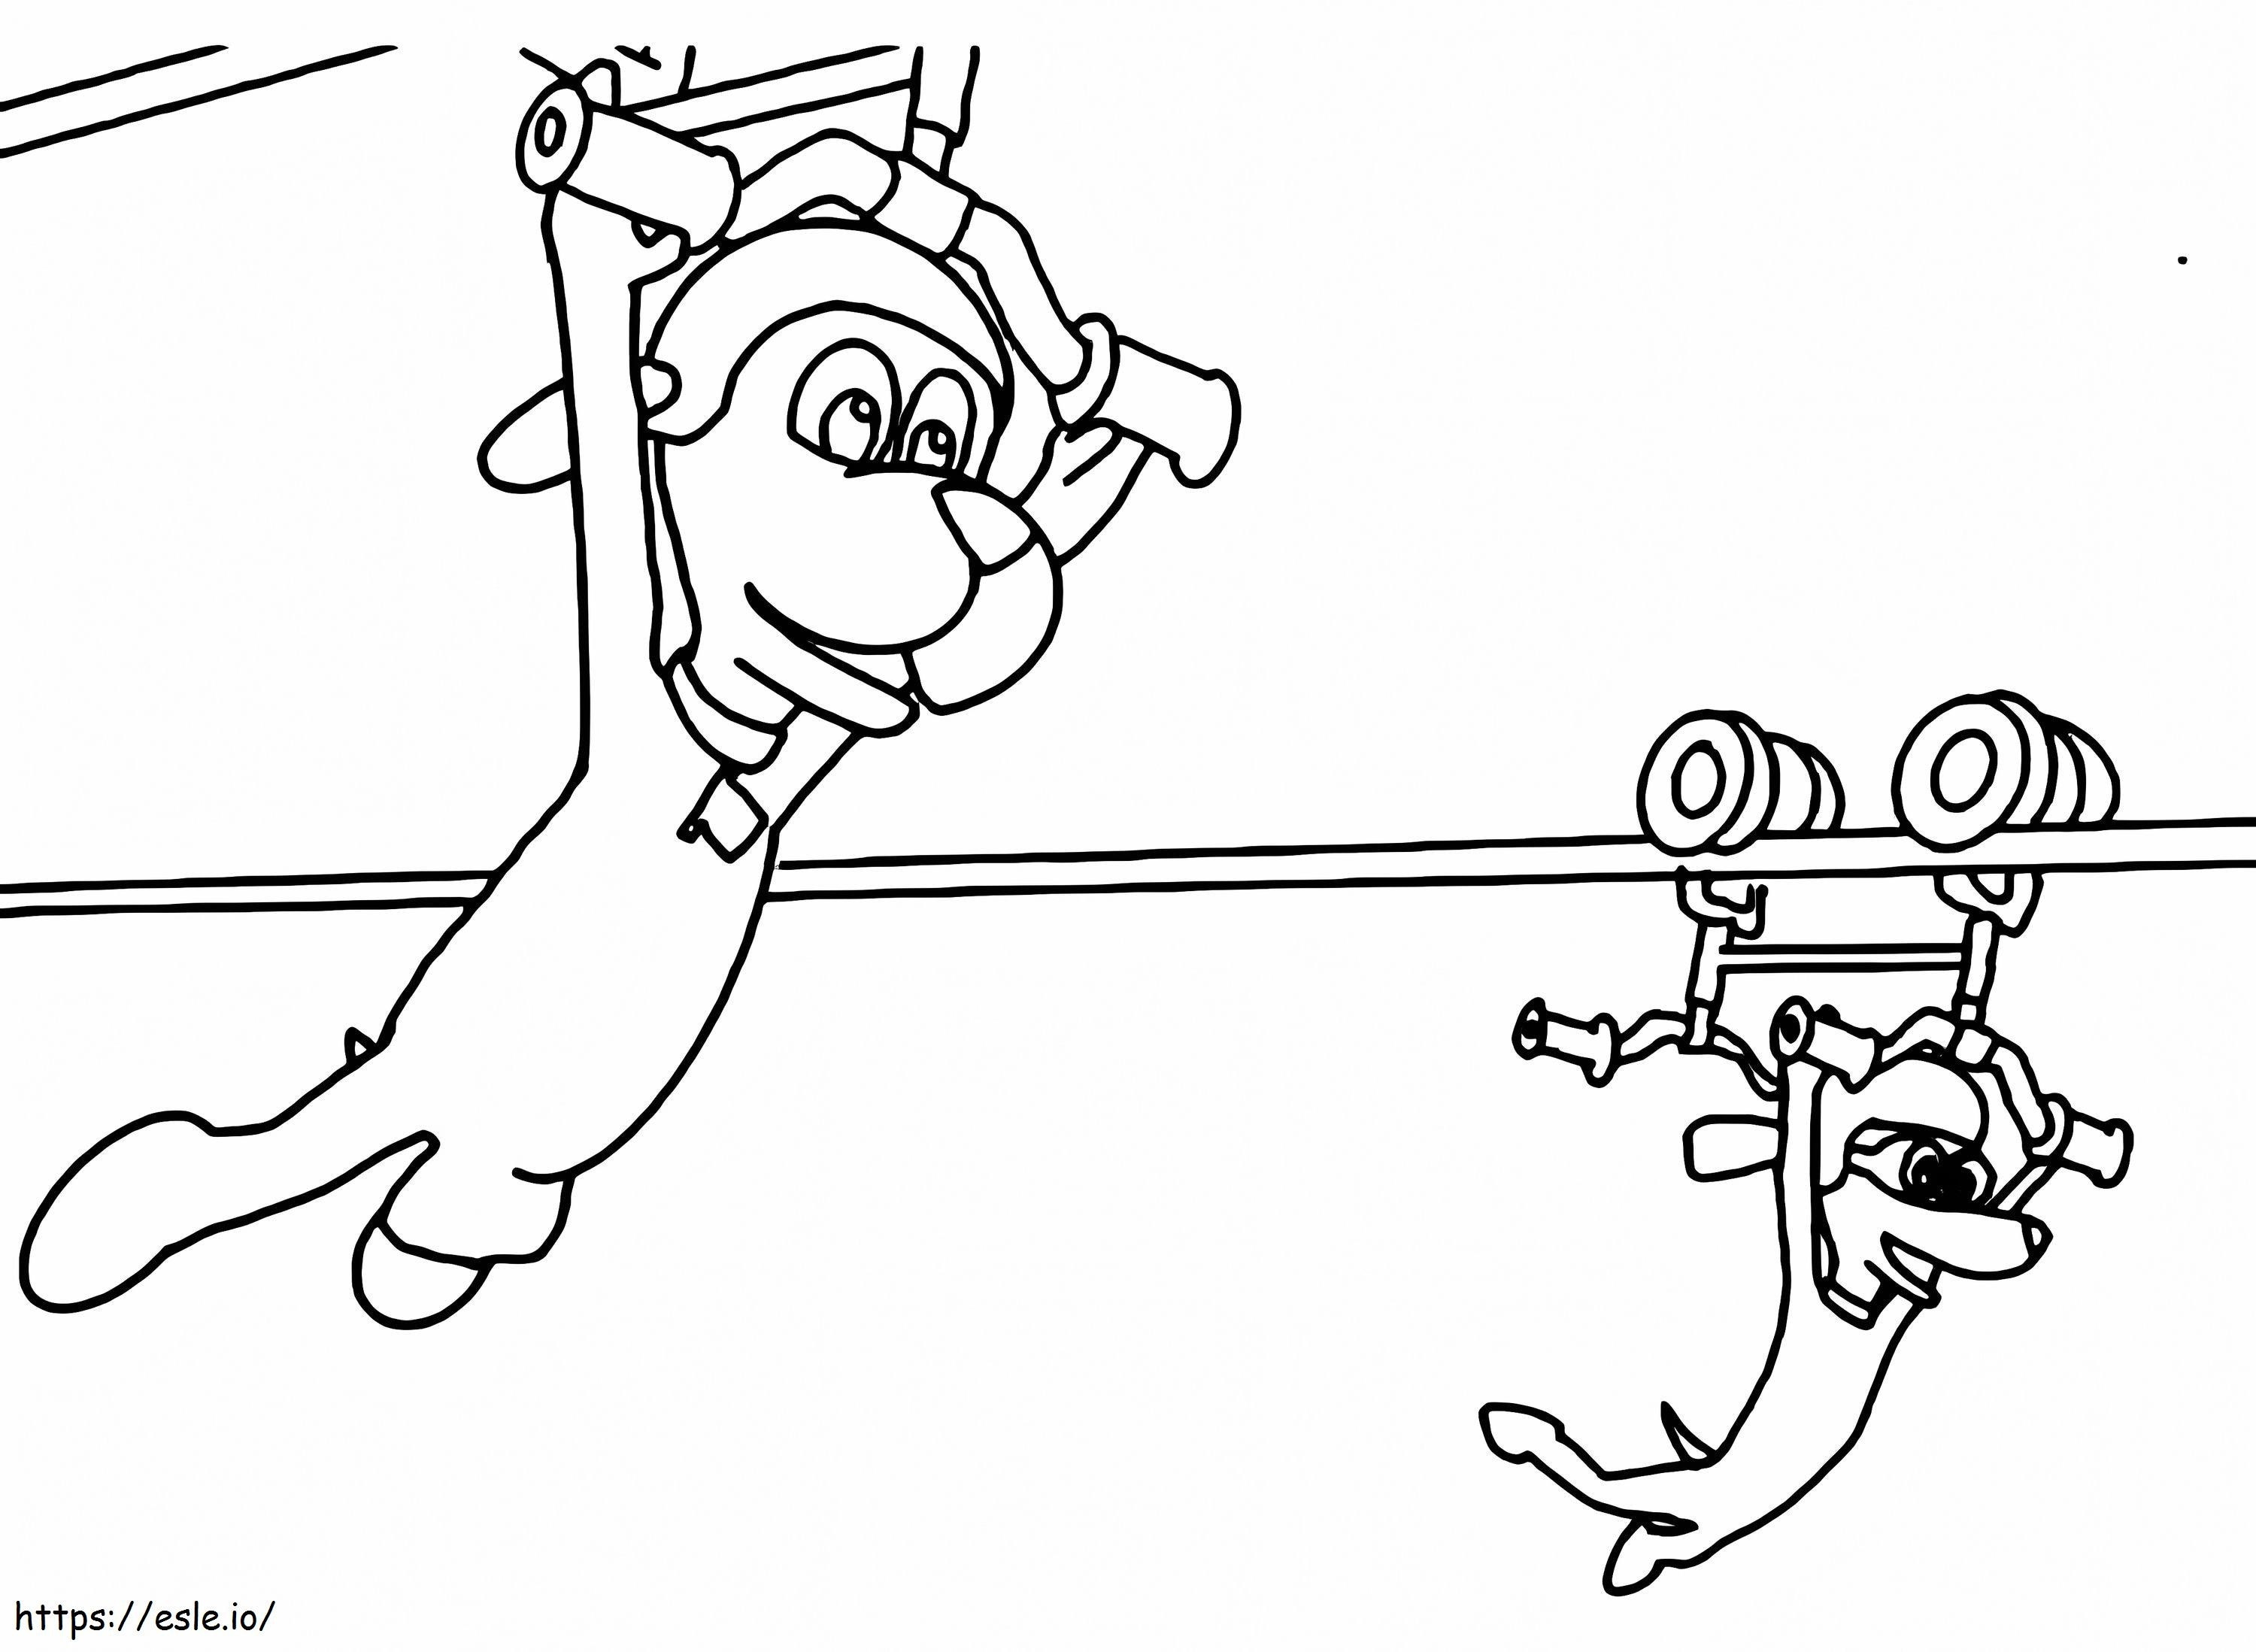 Go Dog Go 4 coloring page